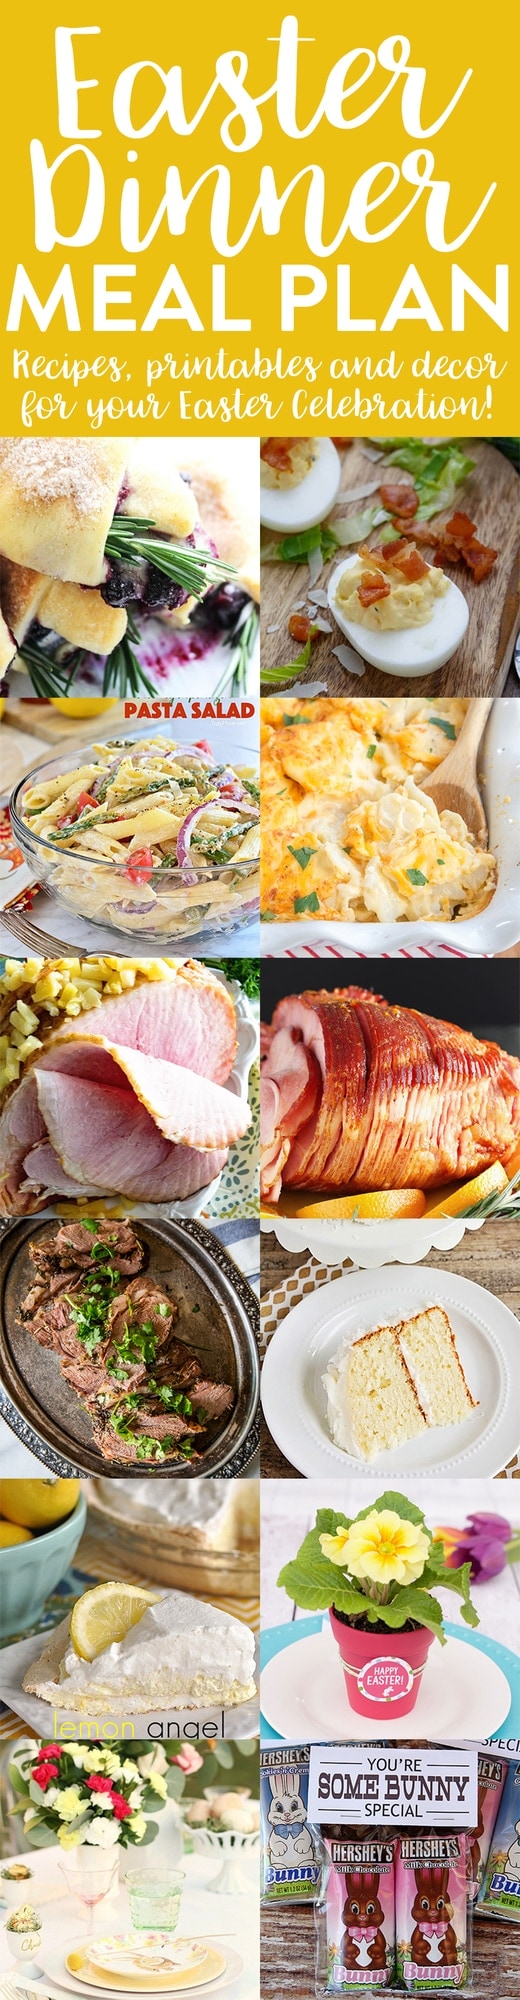 Easter Dinner Meal Plan - a full menu of recipes for Easter dinner, plus some gorgeous Easter table setting ideas and Easter printables!